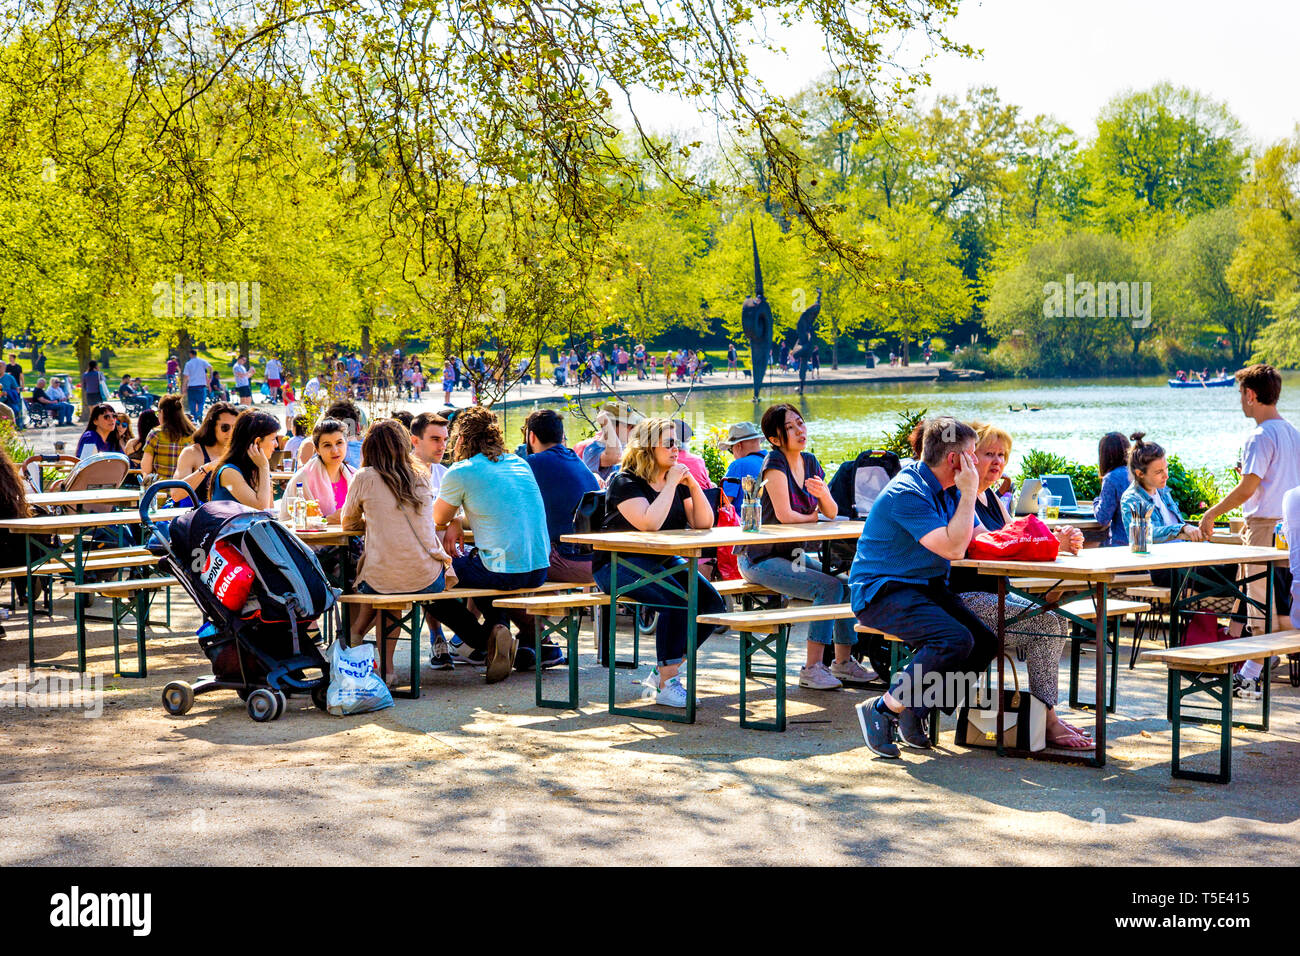 21st April 2019 - People sitting in the sun at the Pavilion Cafe by Wast Boating Lake during Bank Holiday heatwave in Victoria Park, London, UK Stock Photo